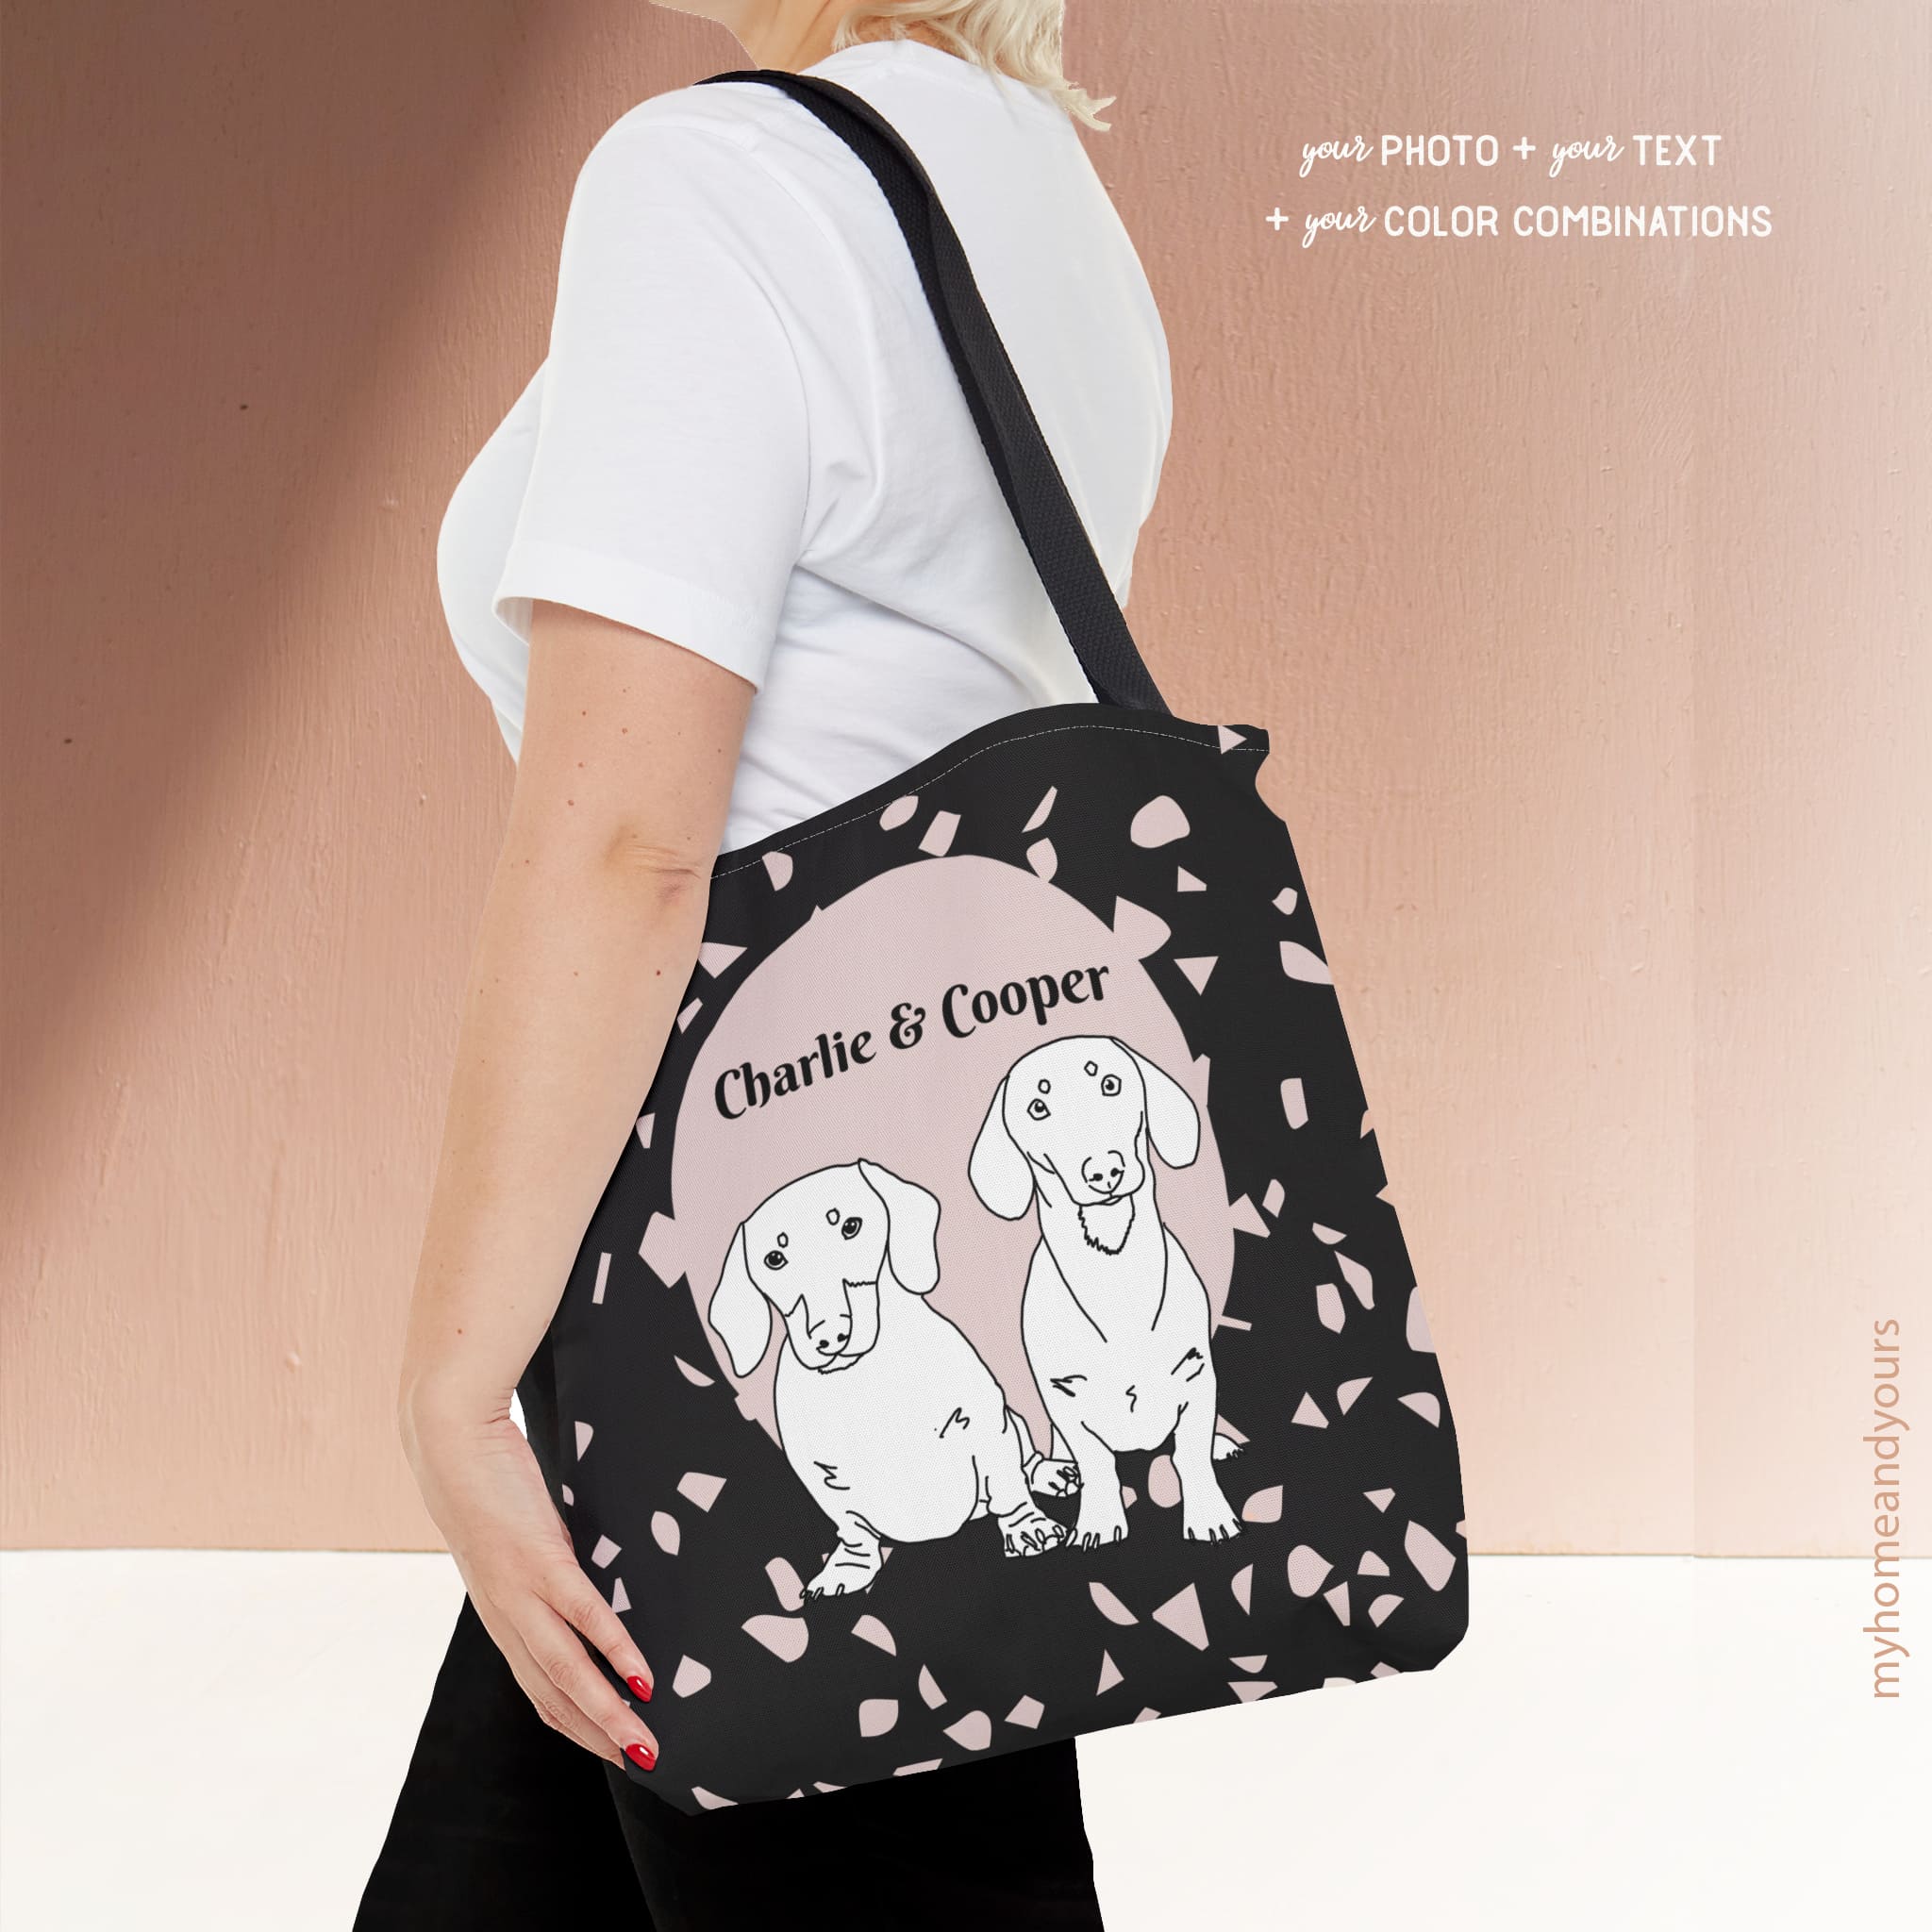 custom dog line art portrait illustration tote bag with fashionable colorblocking terrazzoo pattern back ground for dog moms and pet parents